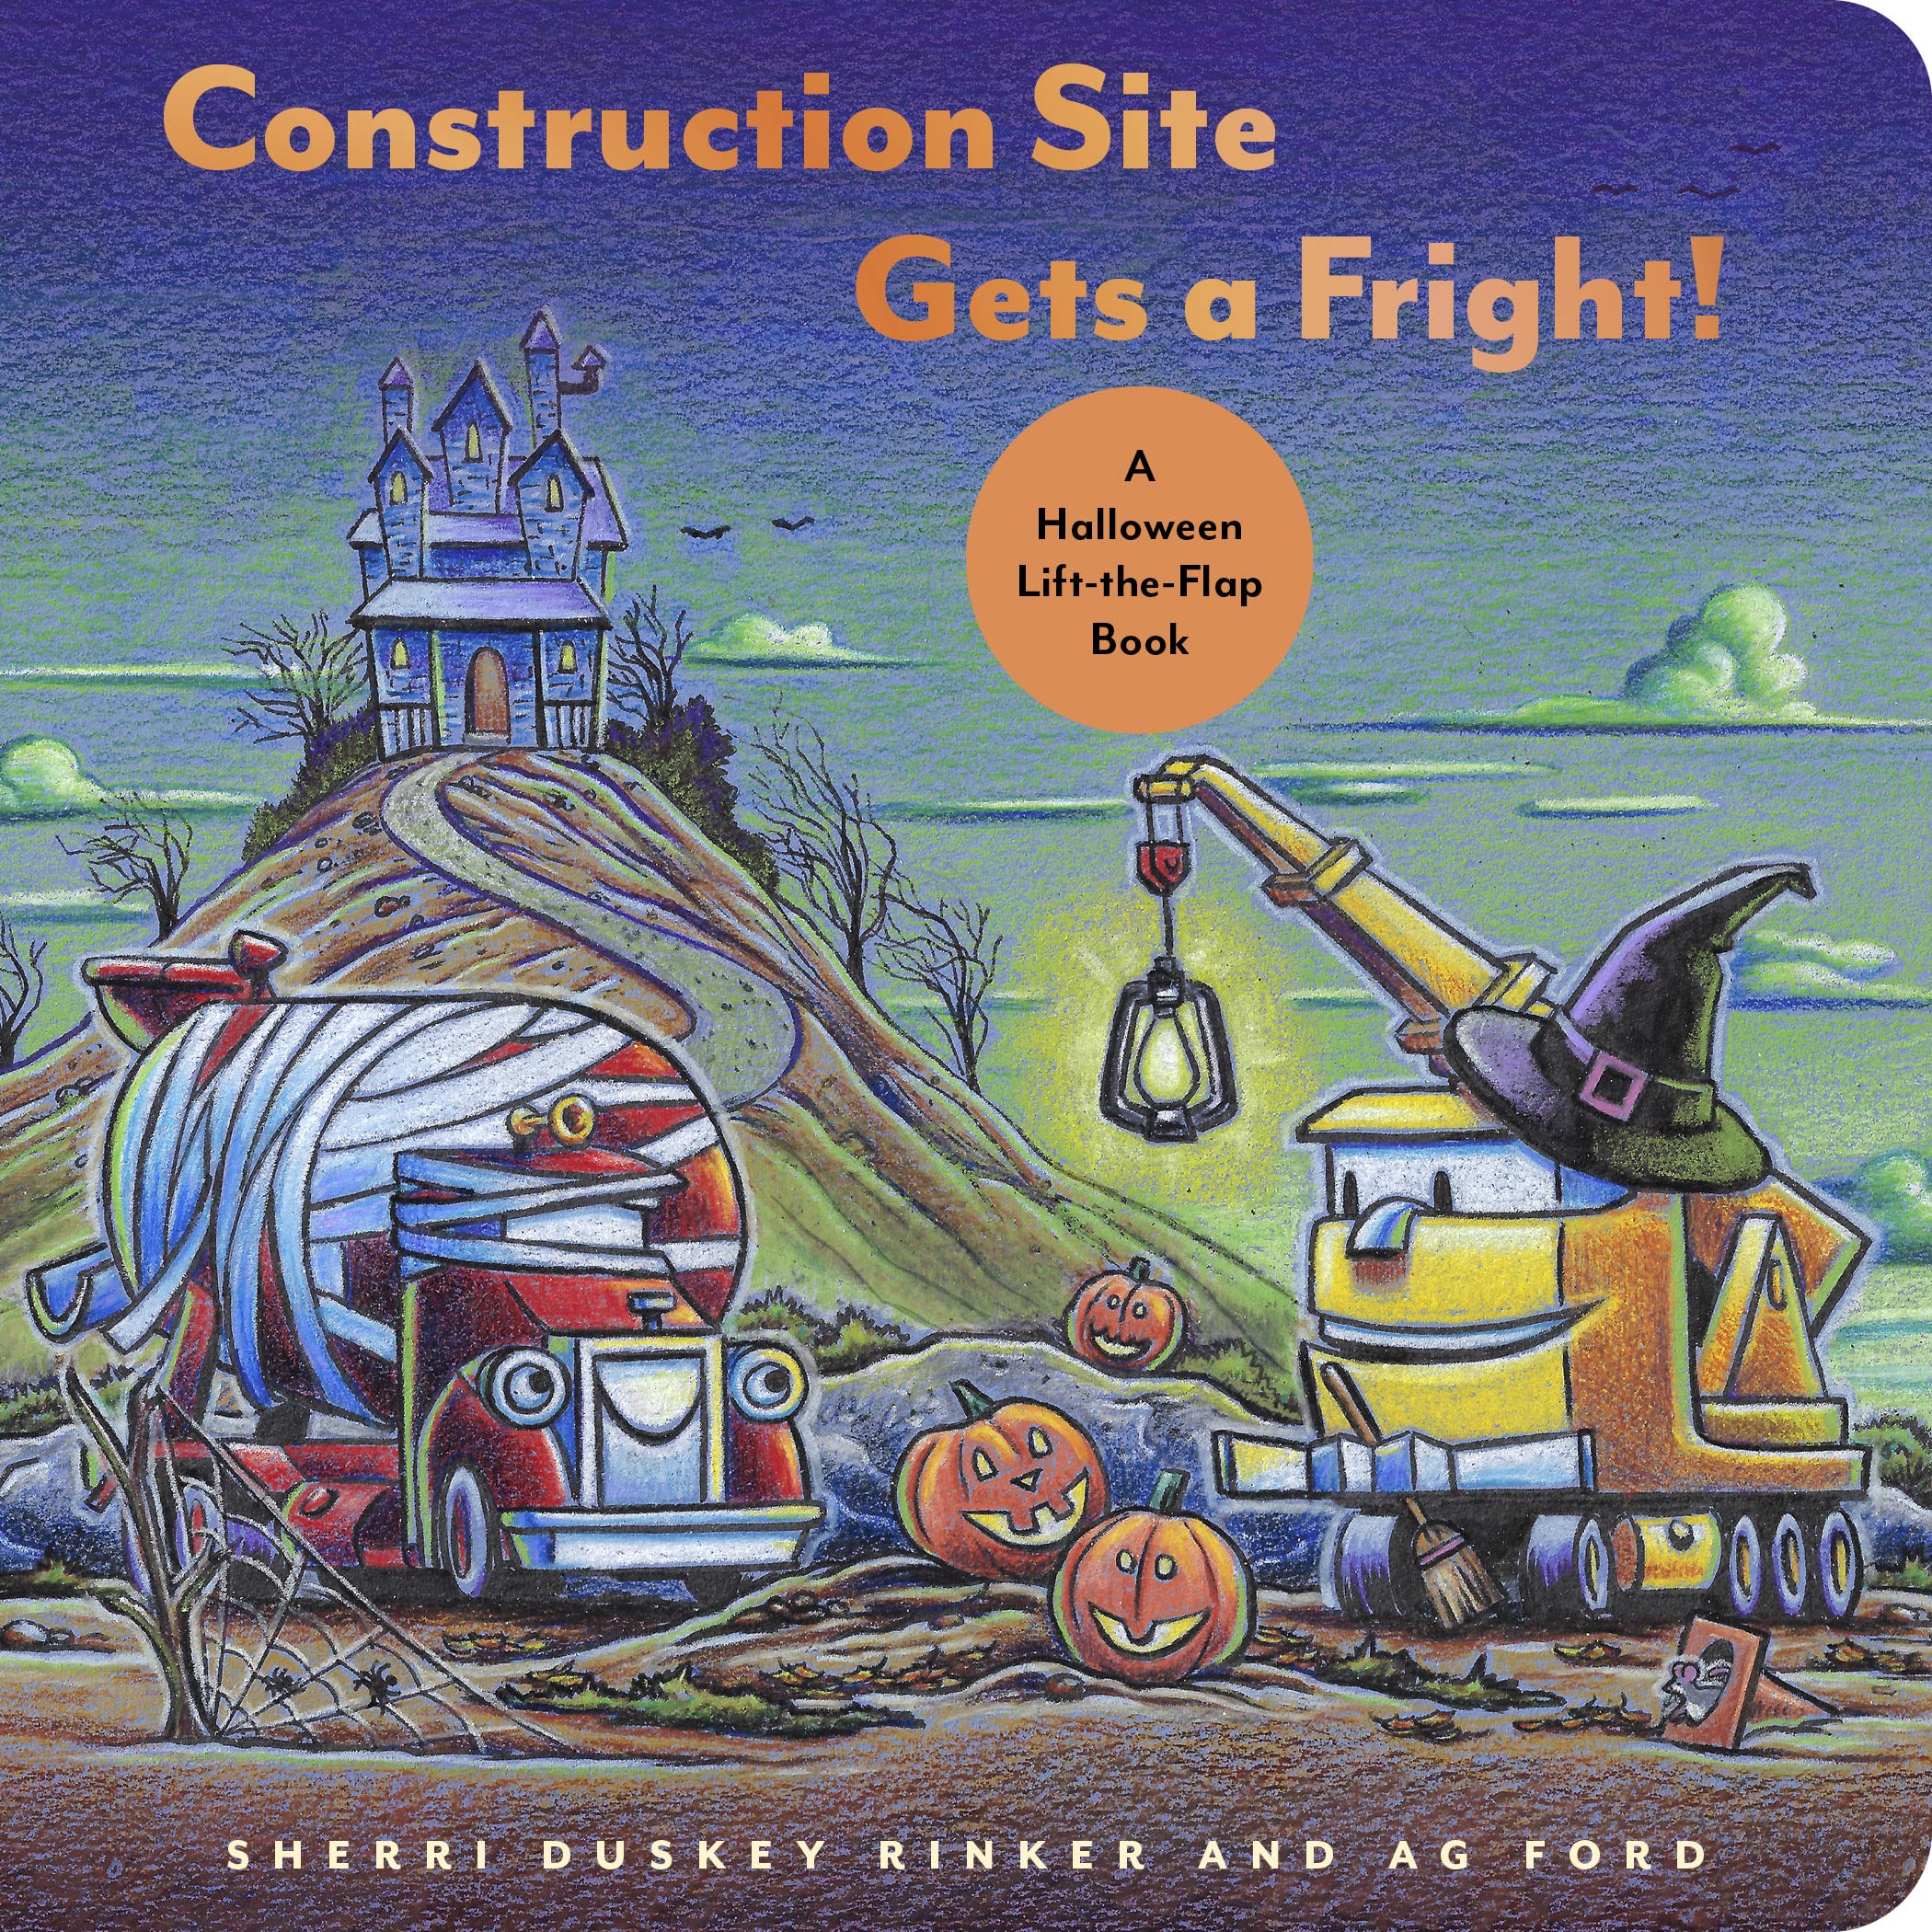 Construction Site Gets a Fright book cover